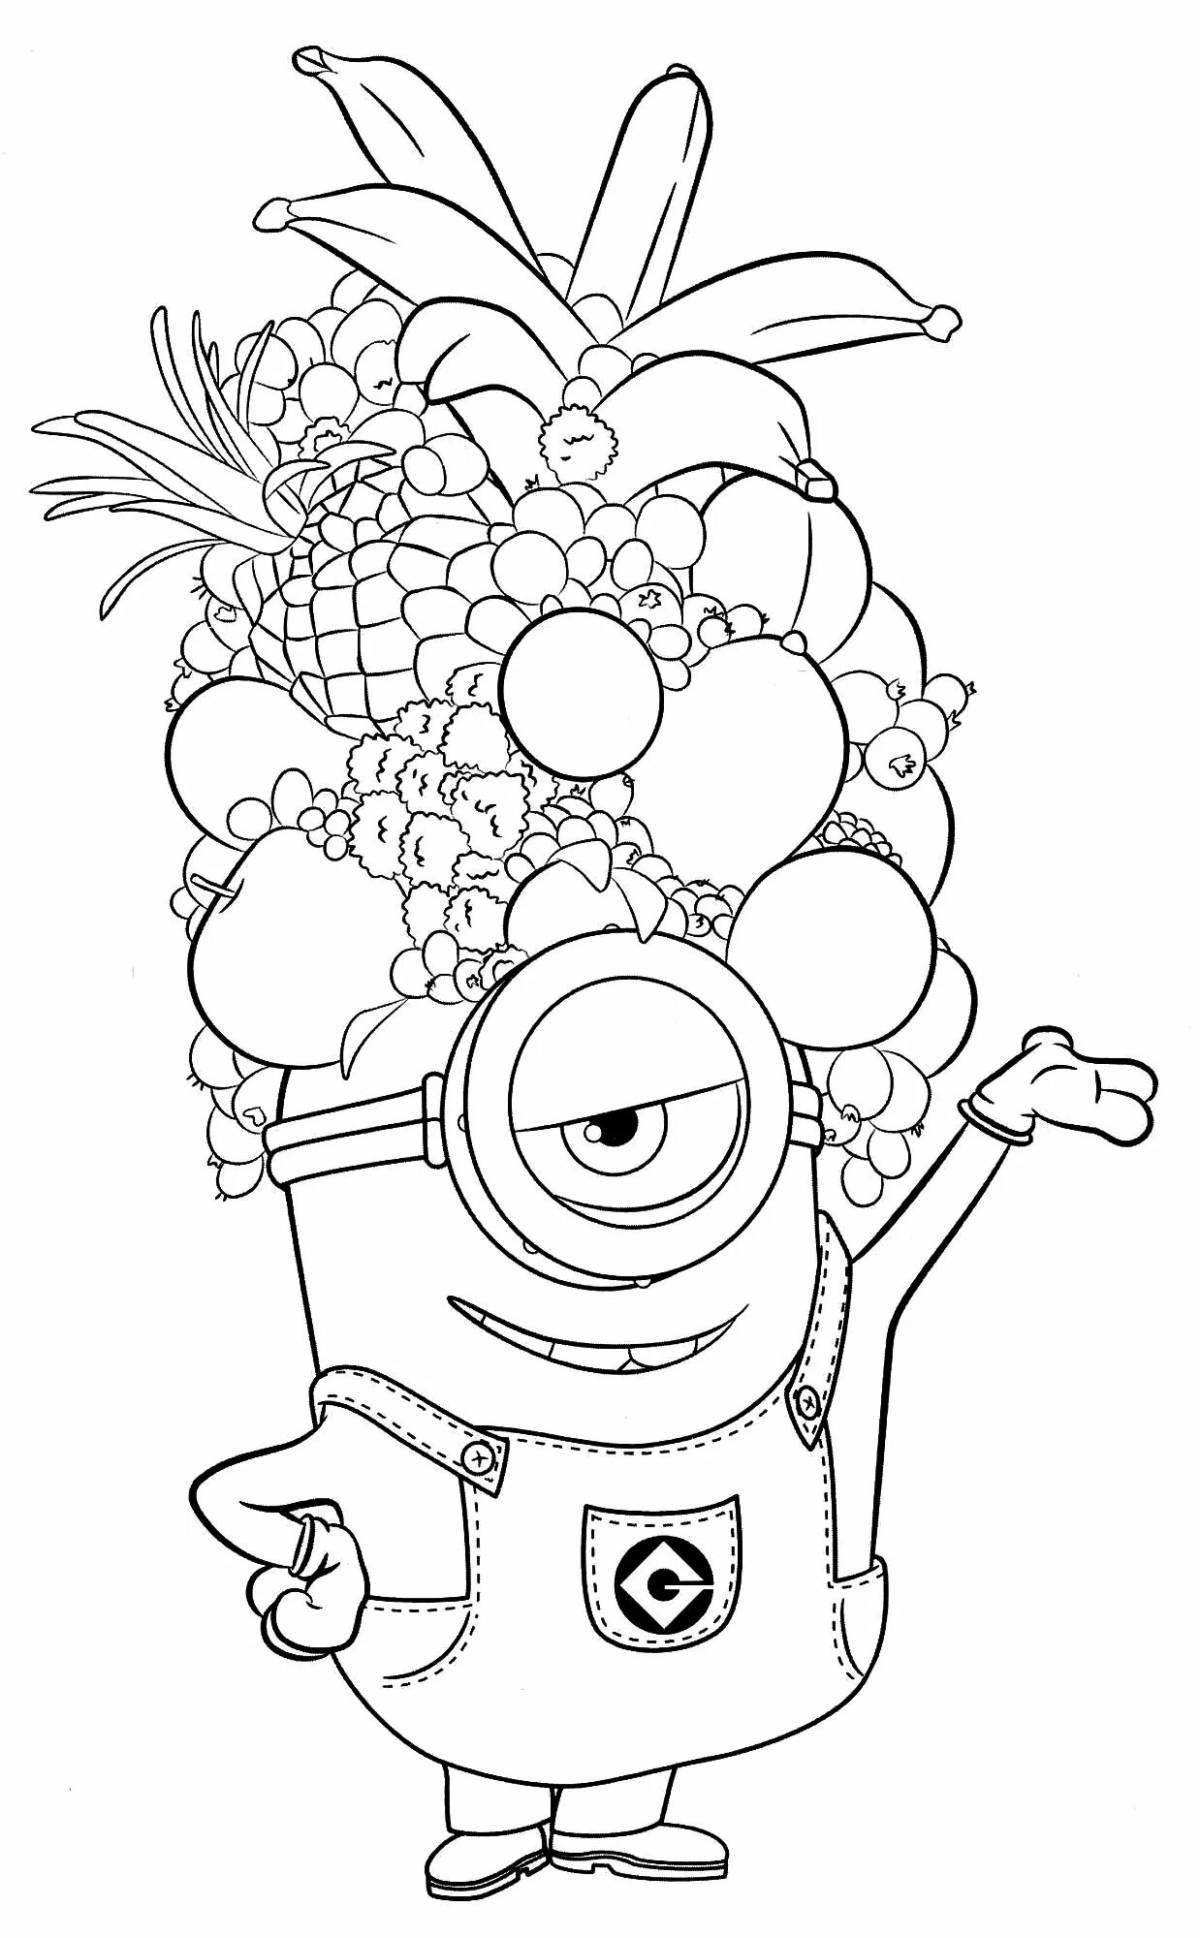 Minion strawberry sweet coloring